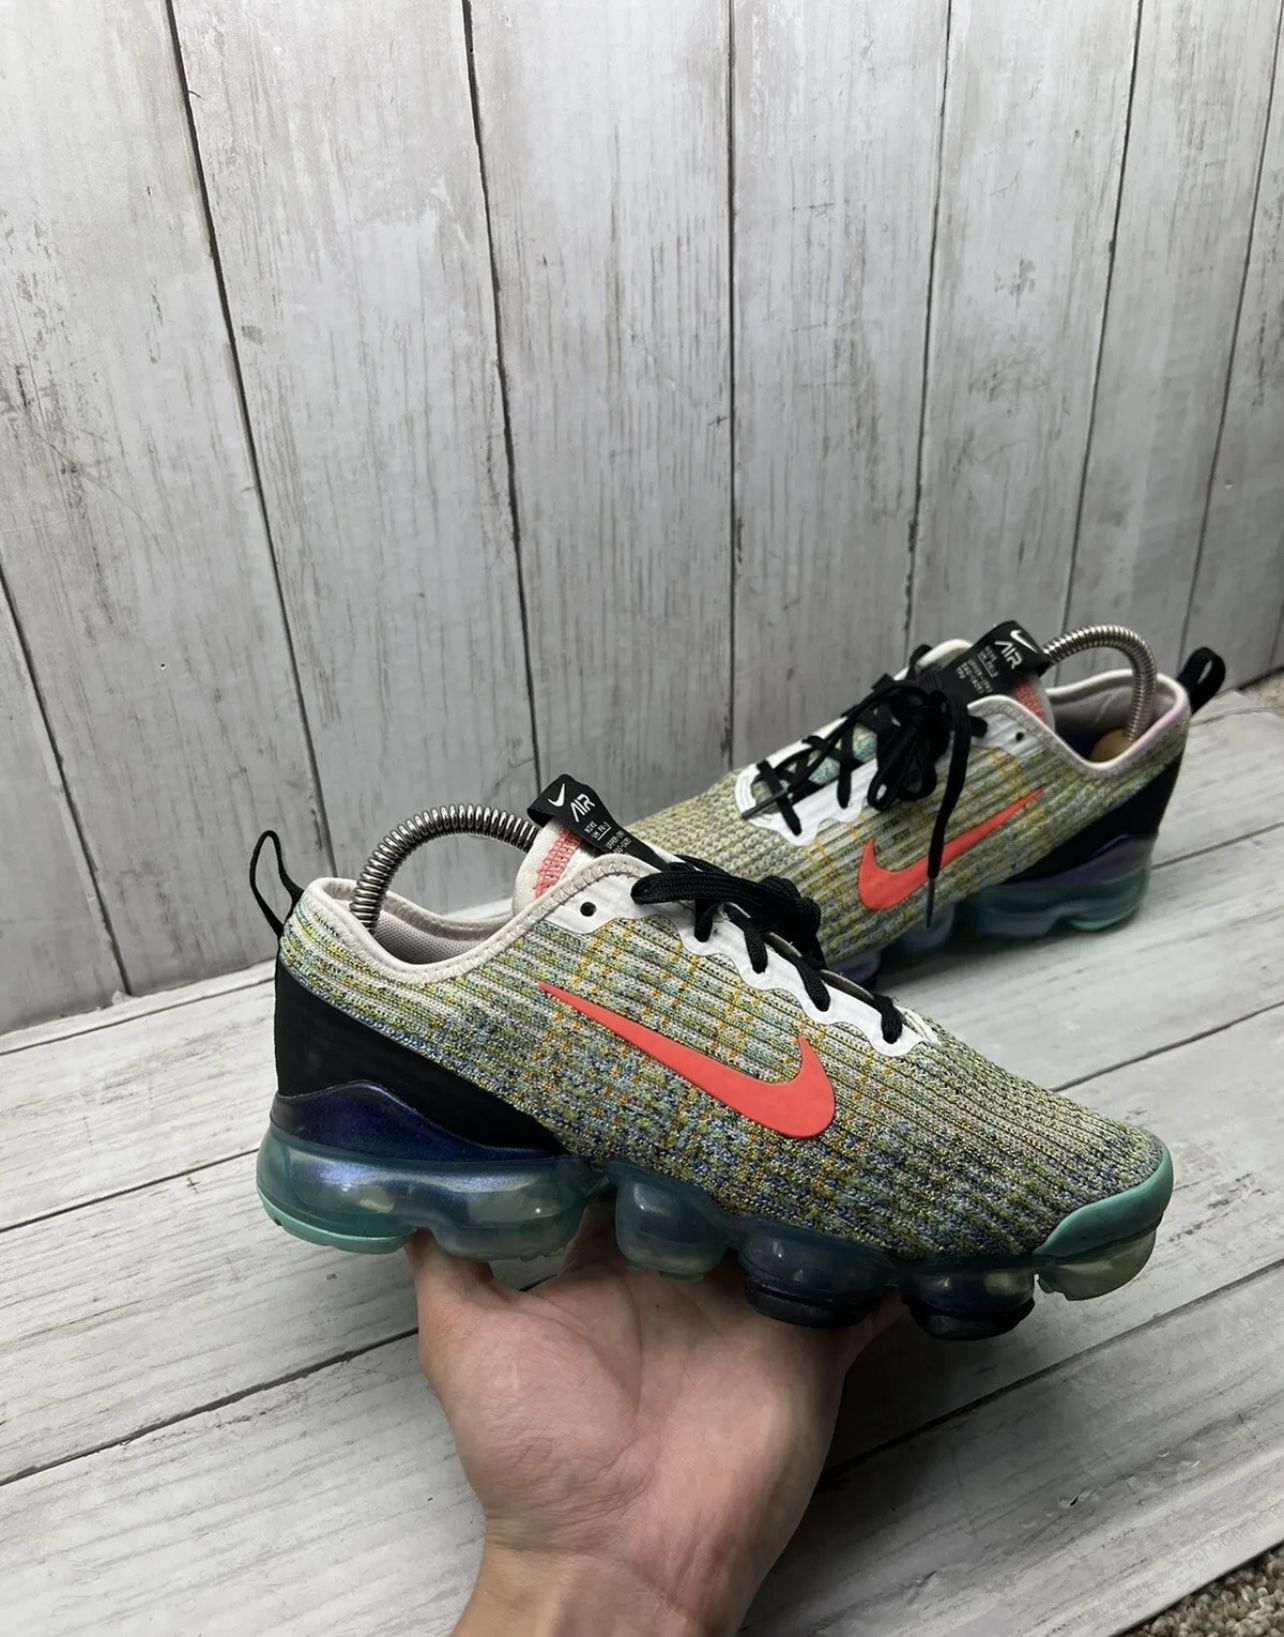 Nike Air Vapormax Flyknit : How to wear them ?